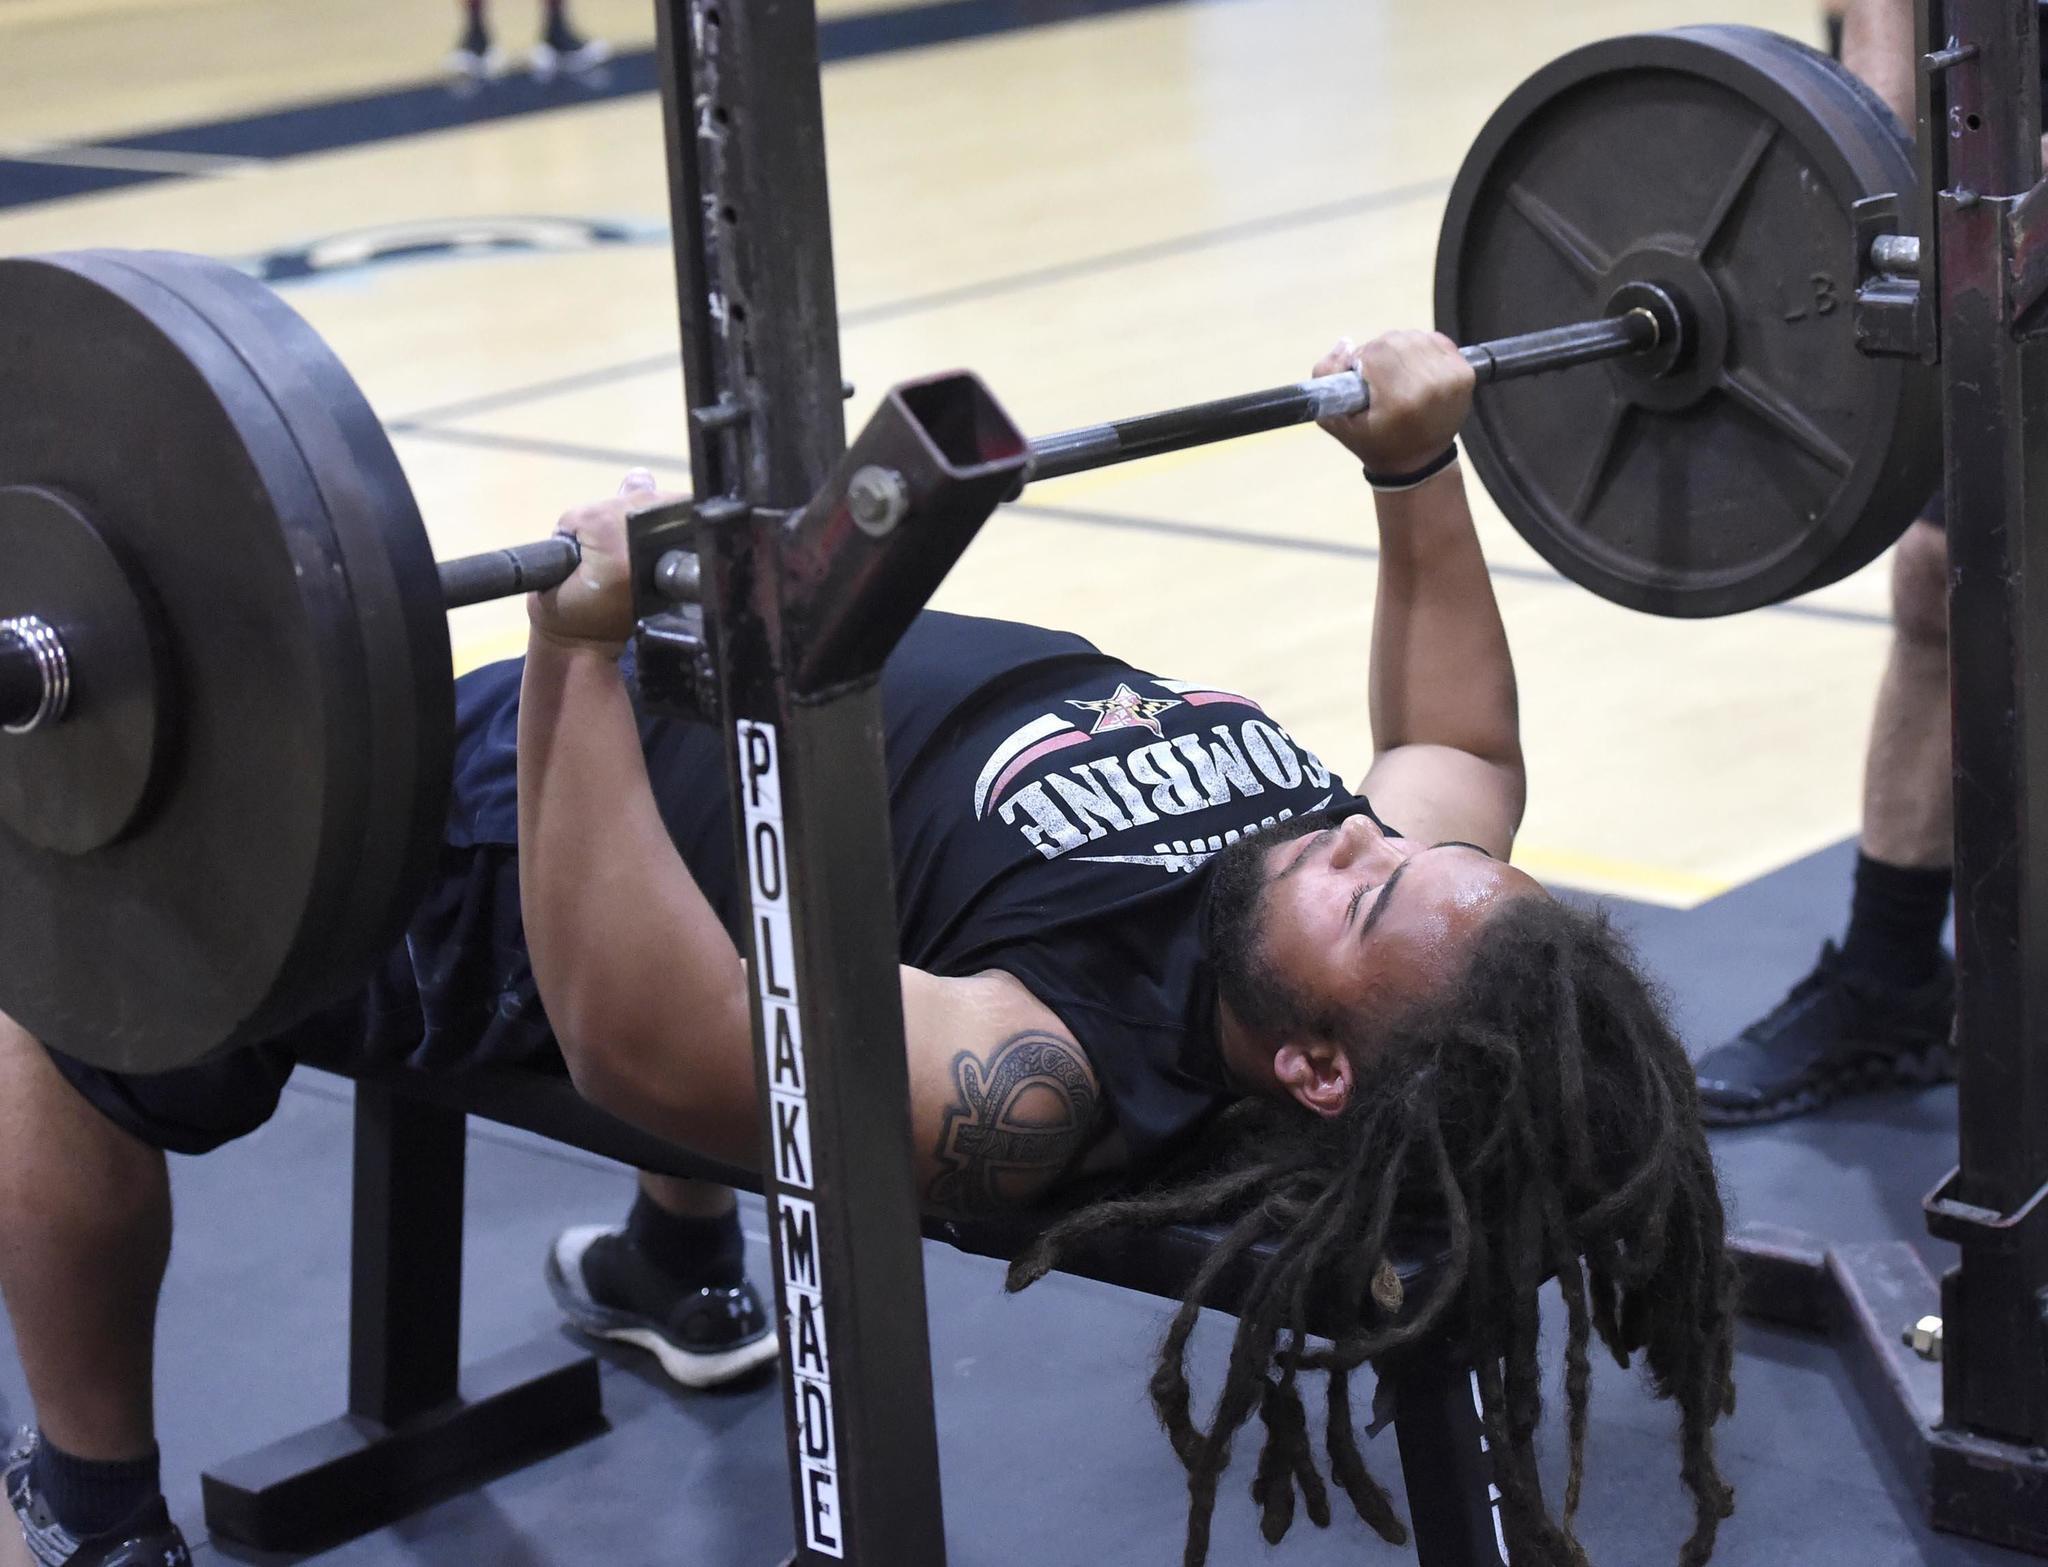 Weightlifting: Powerlifting meet increasing interest among Carroll athletes - Carroll County Times